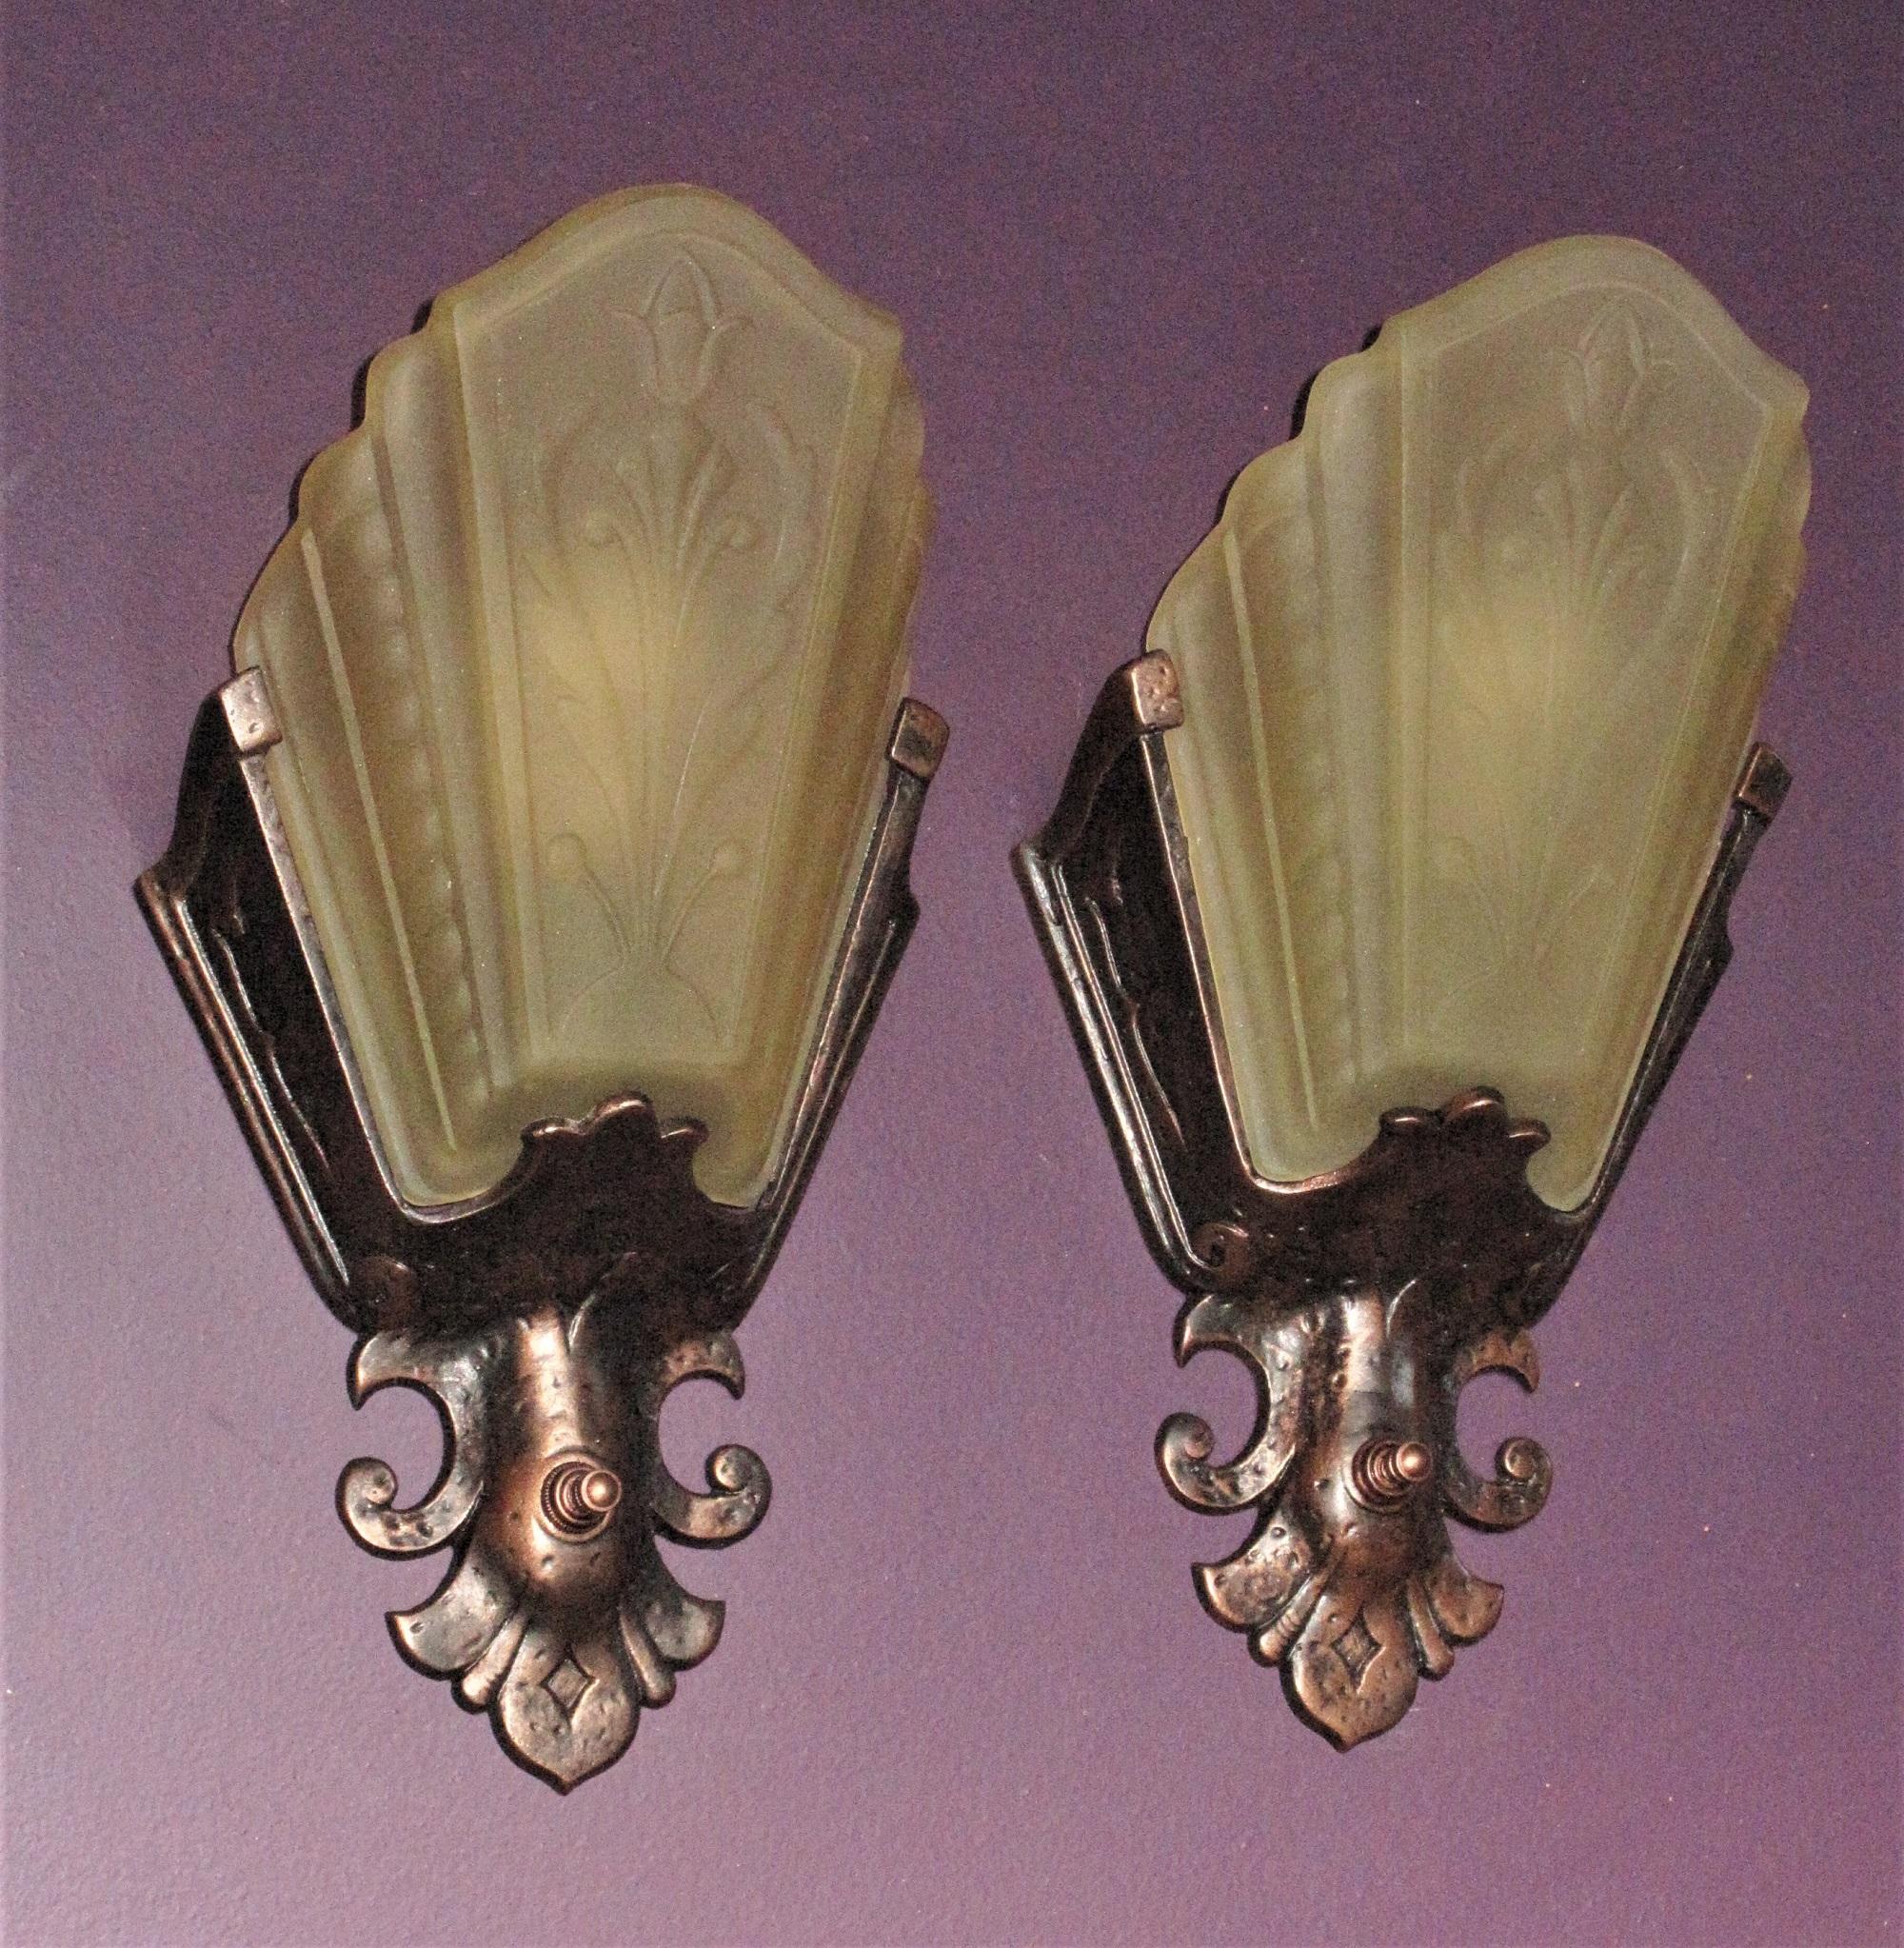 American 3 Art Deco / Revival Slip Shade Sconces 1930s Priced per pair For Sale